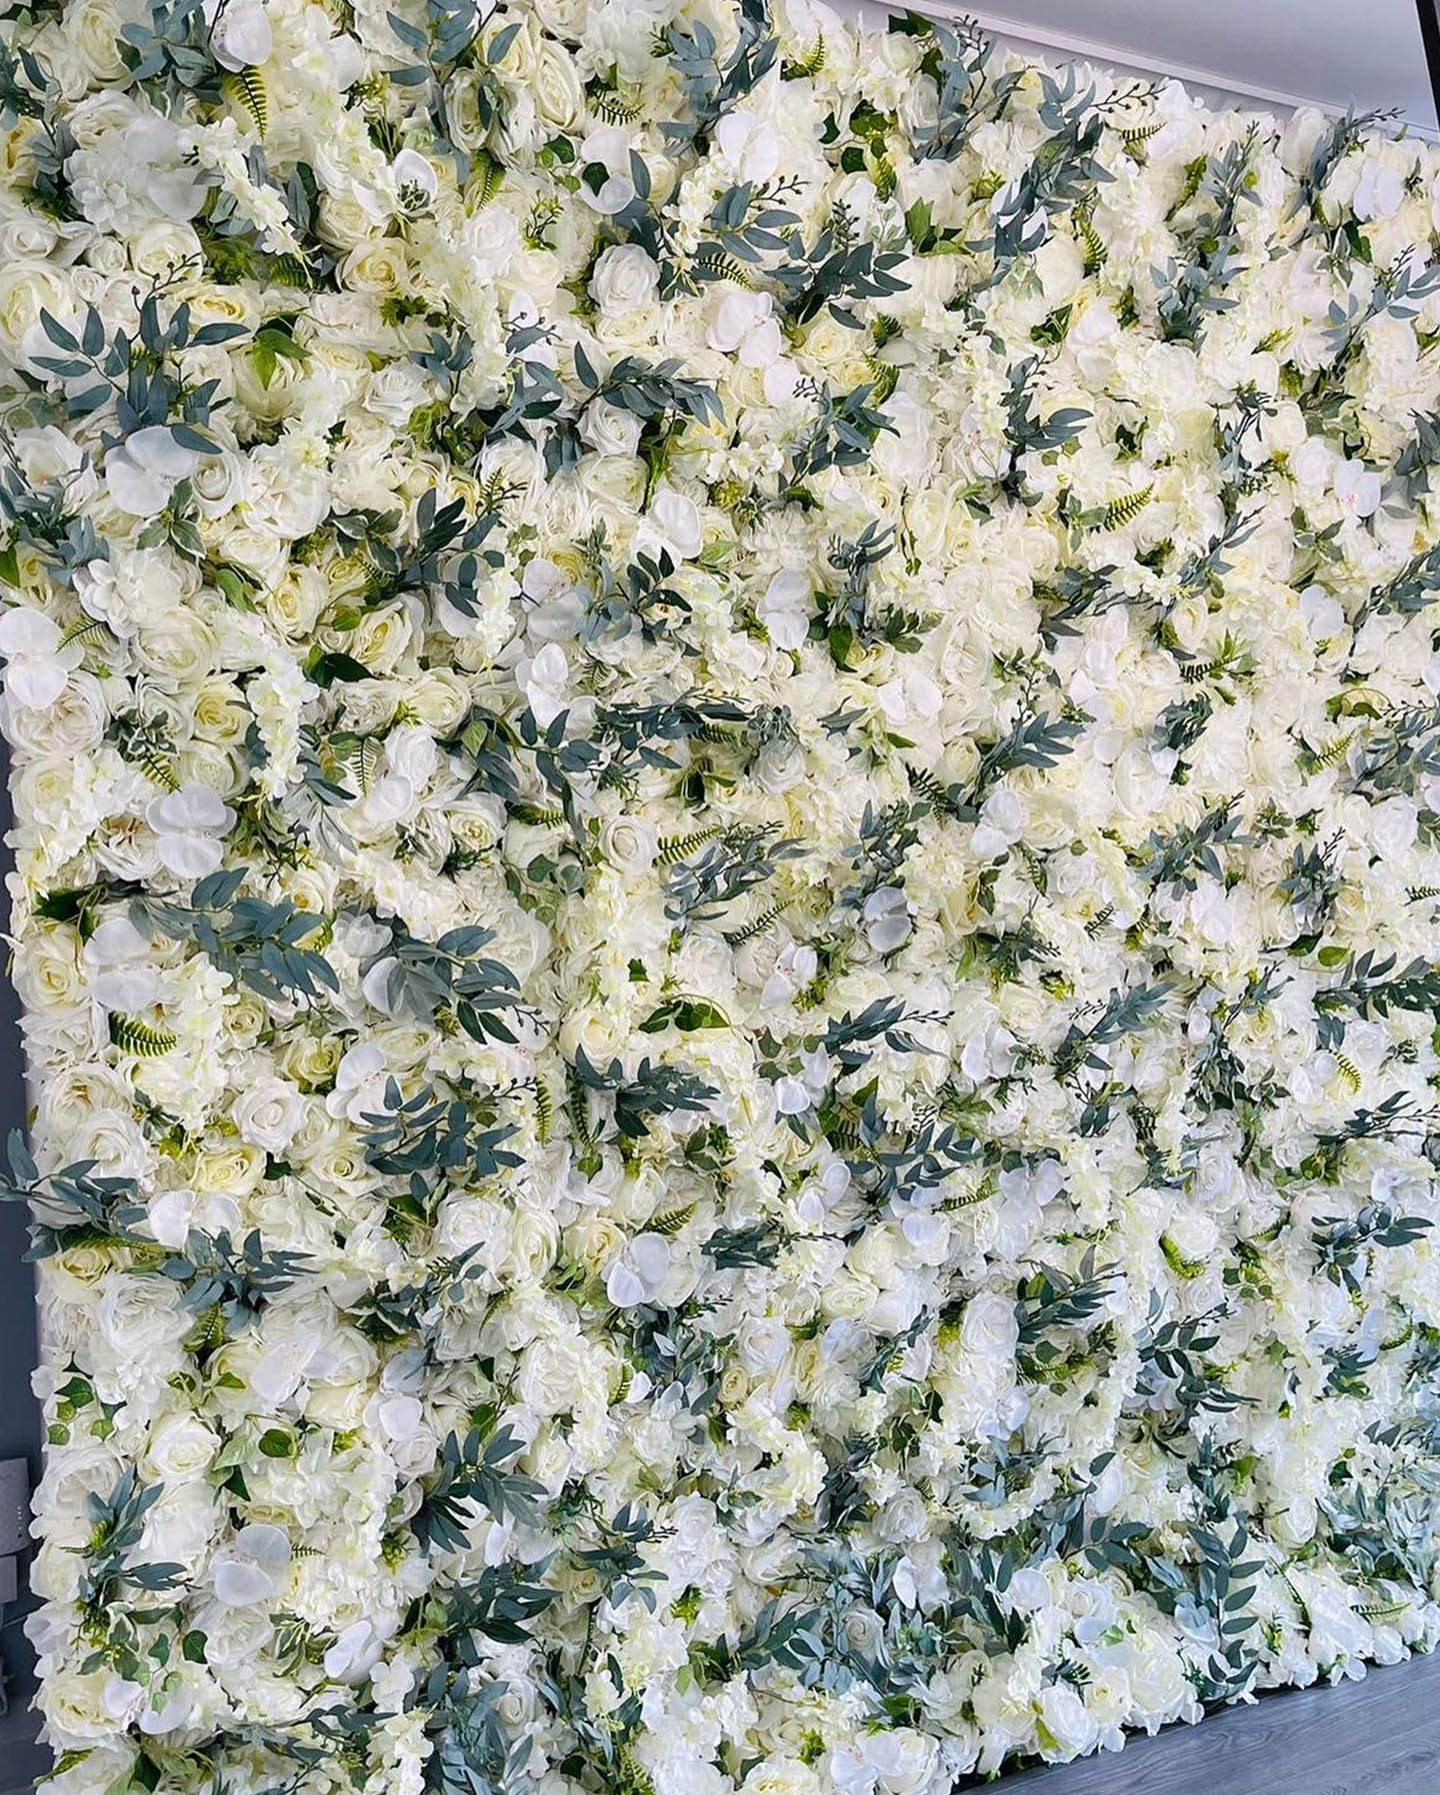 White Flower Wall with Greenery